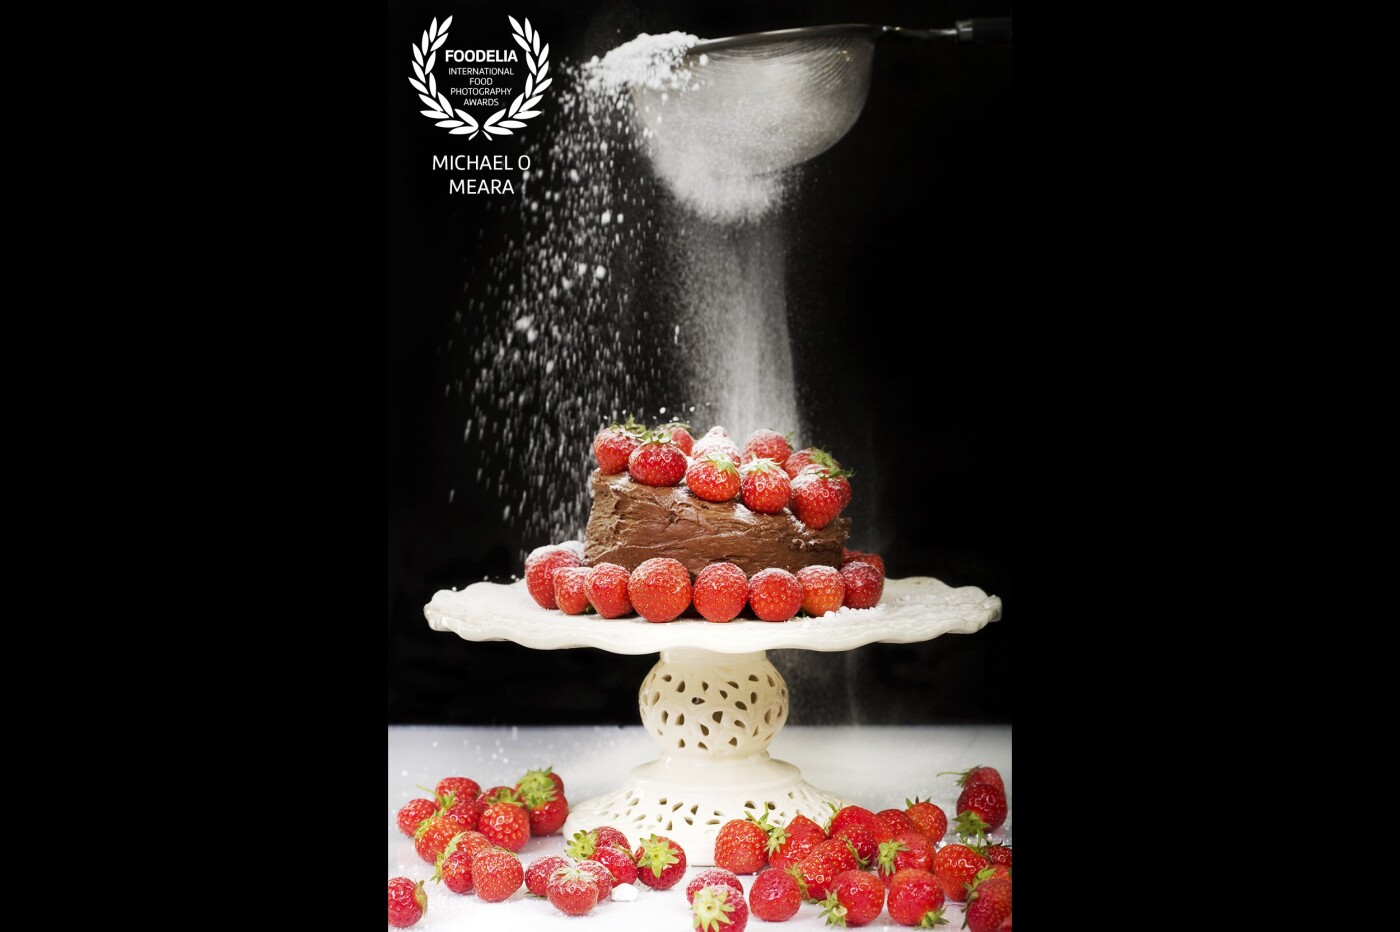 A fun image of a strawberry chocolate cake being dusted with maybe a slightly excessive amount of icing sugar. I wanted to create a cake that anyone could decorate and enjoy making.  